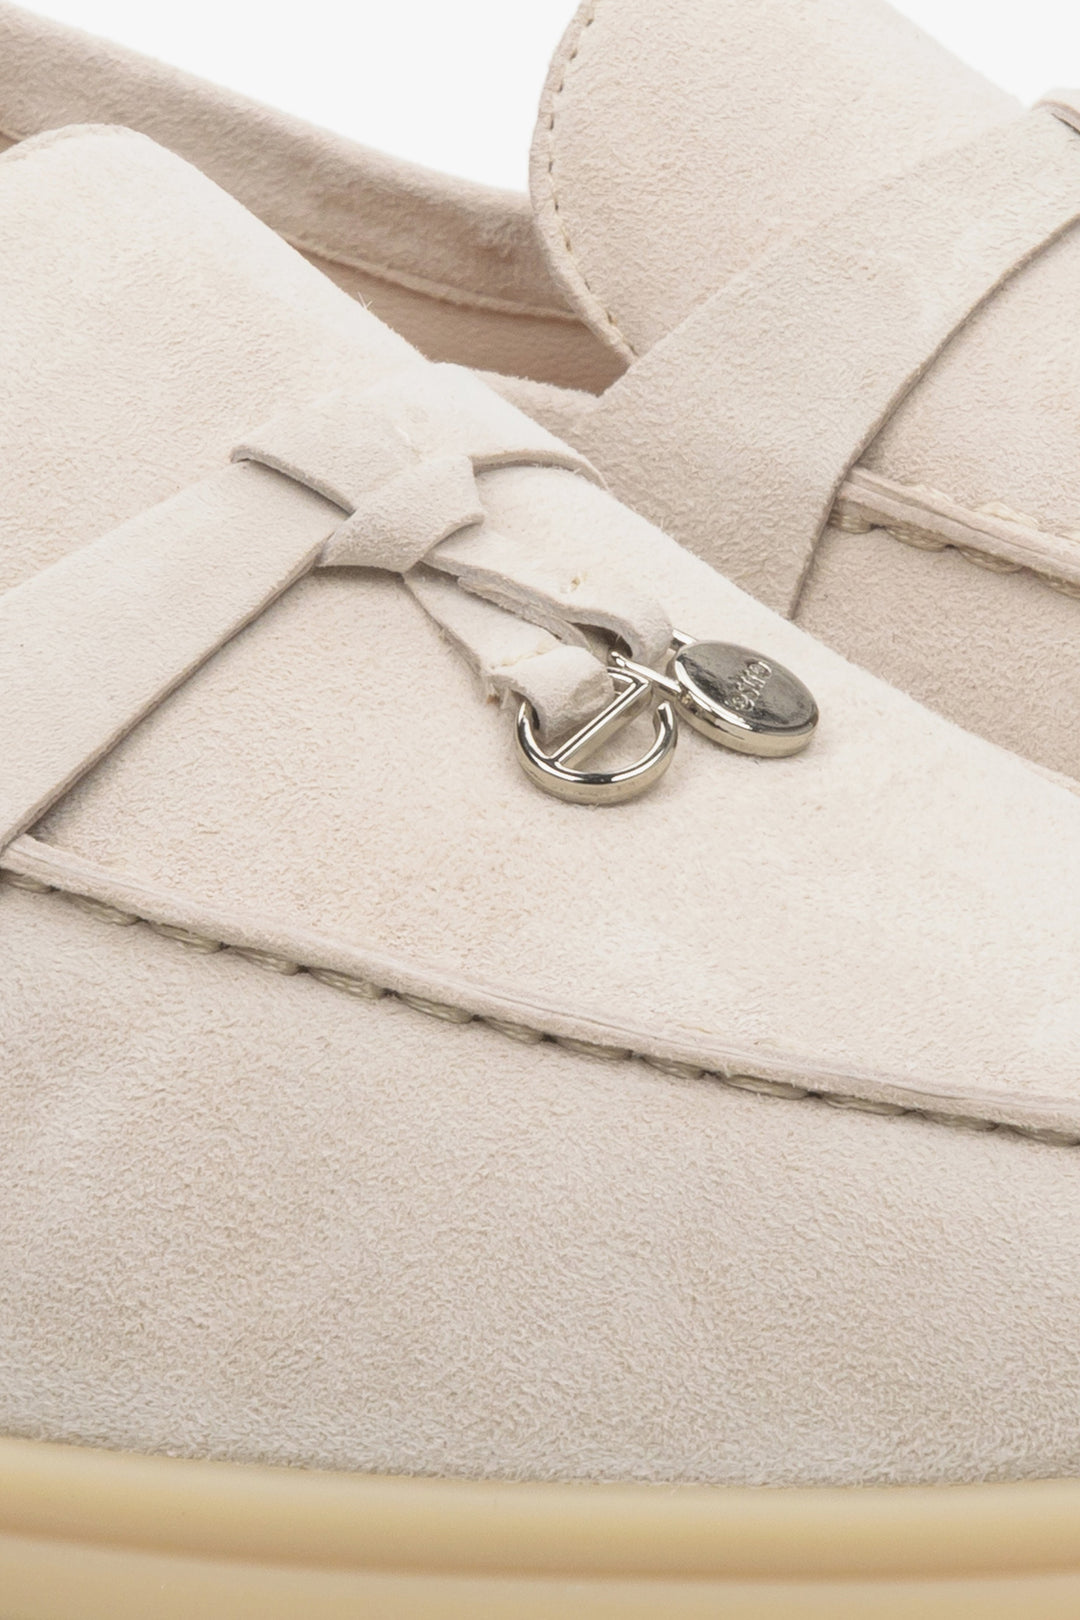 Women's cream beige loafers - a close-up on details.